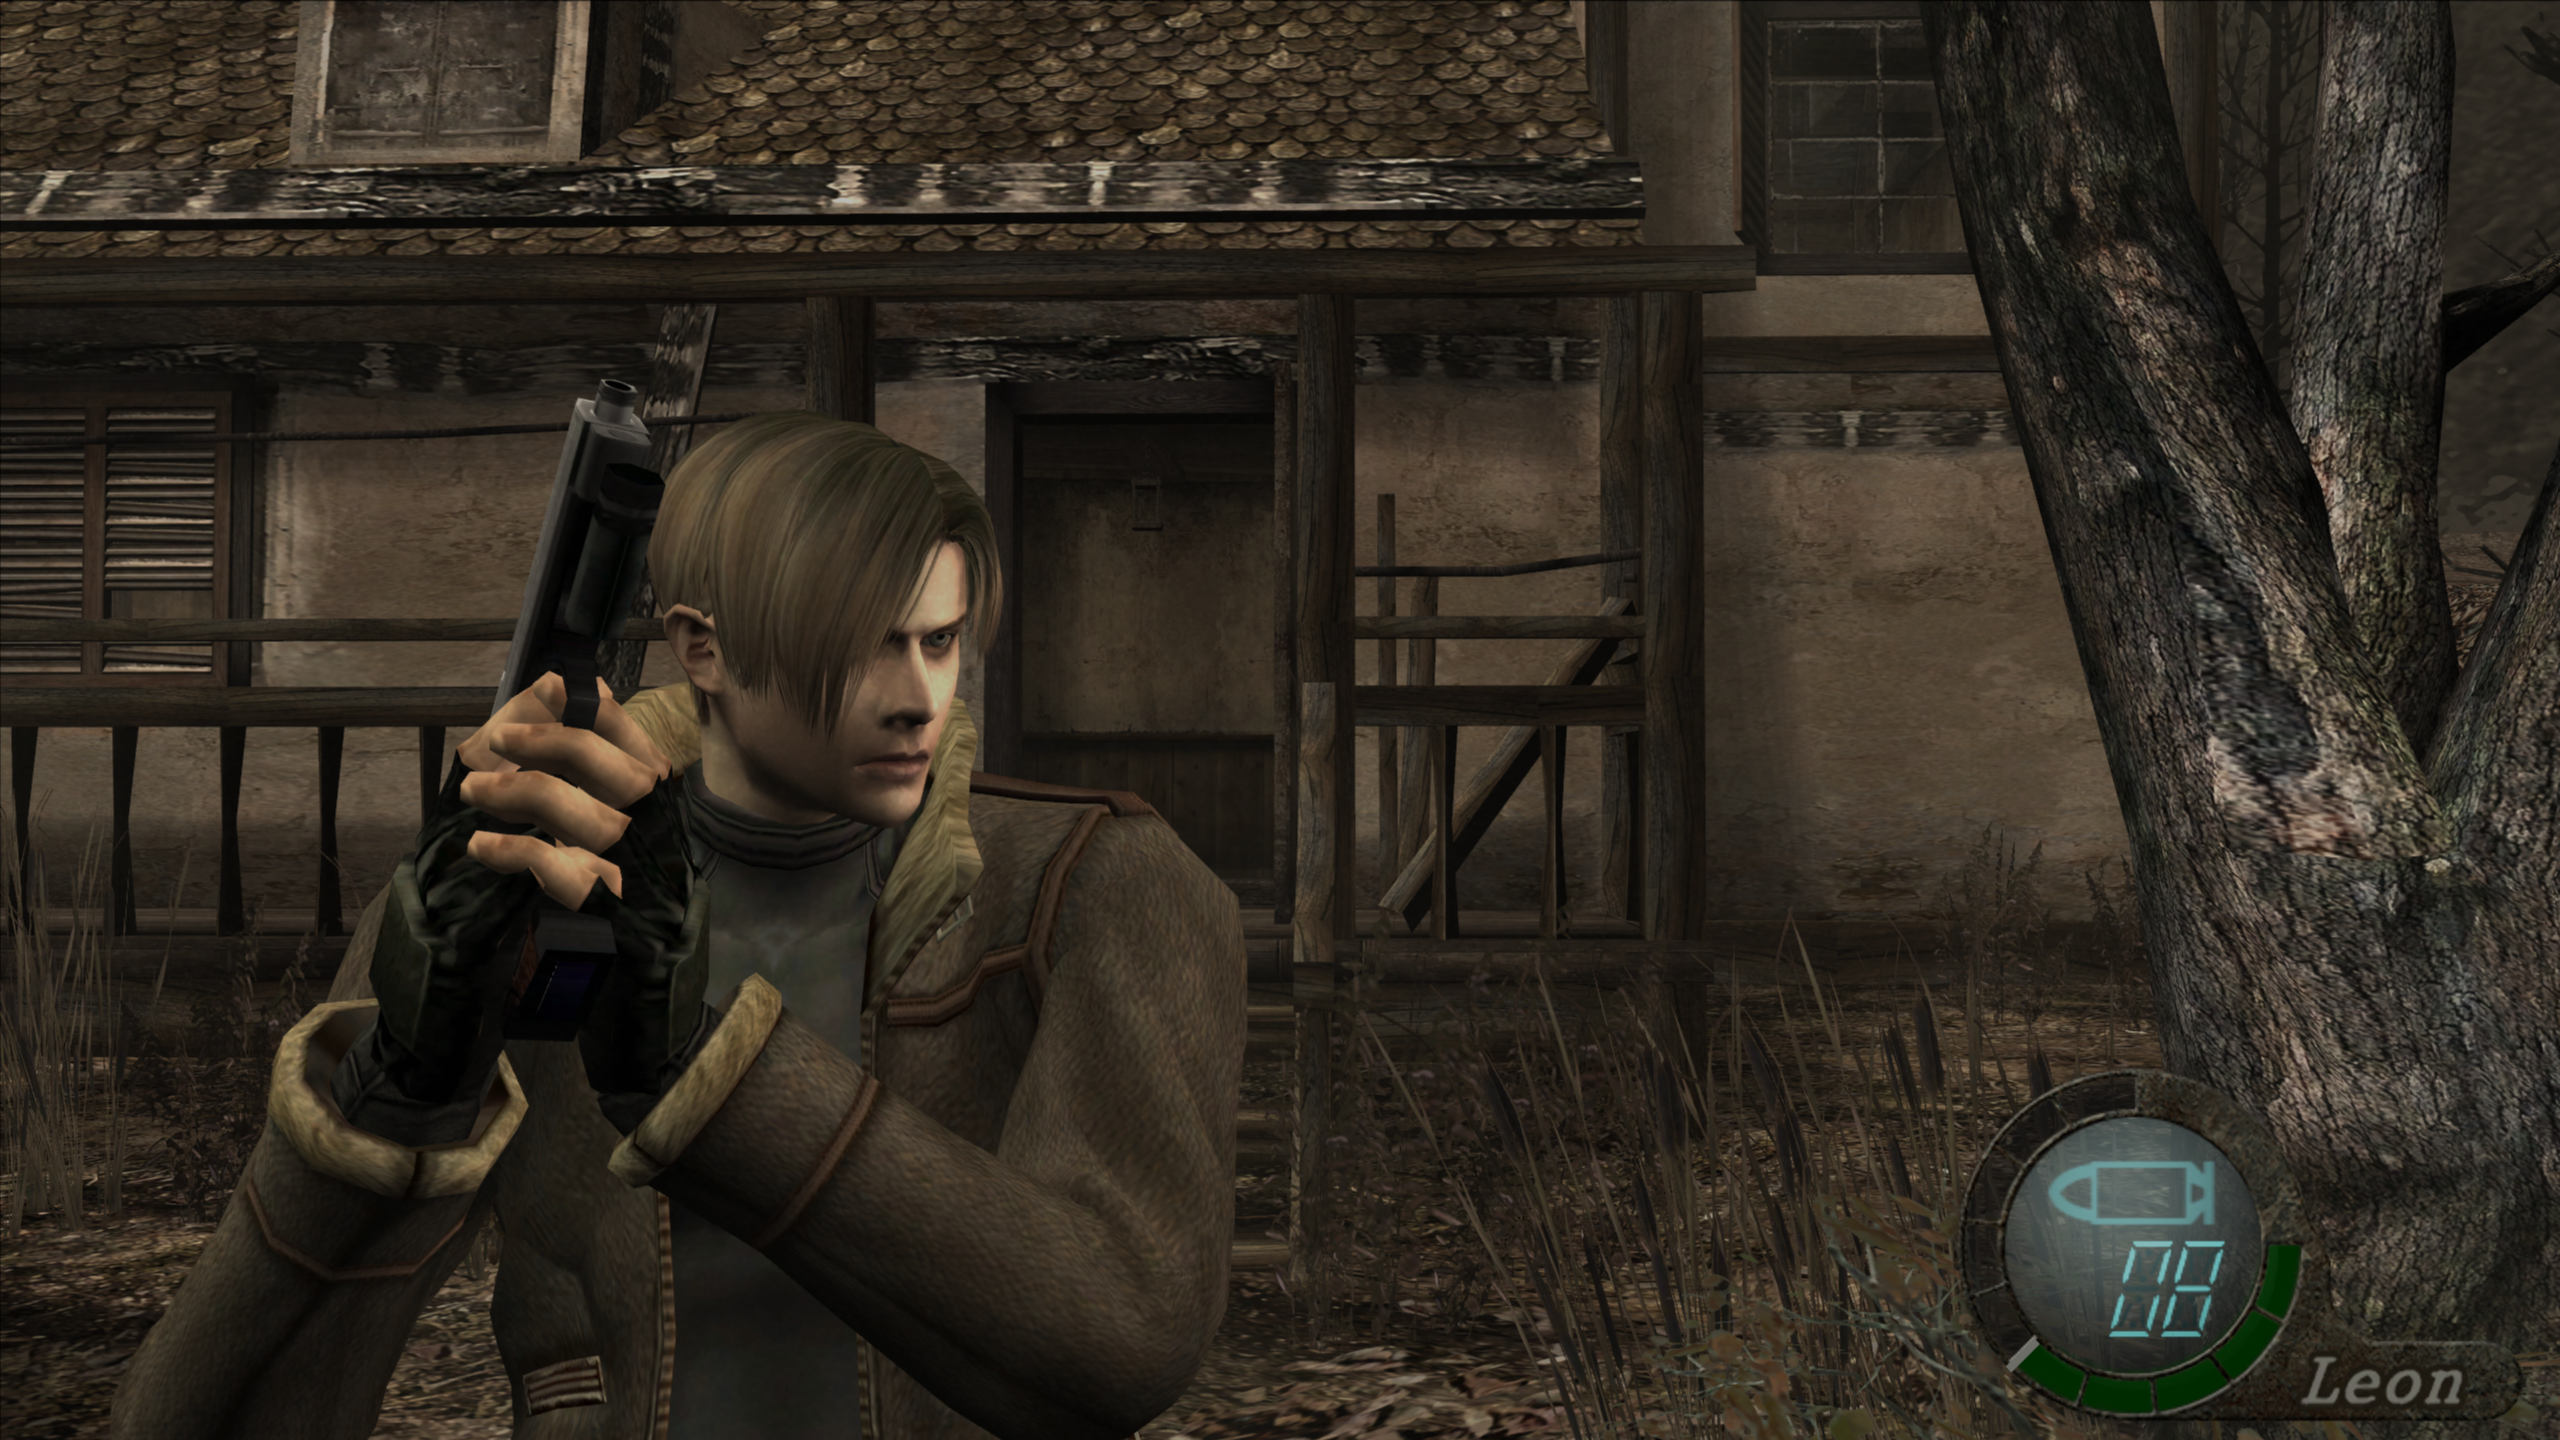 Steam resident evil 4 ultimate hd фото 89